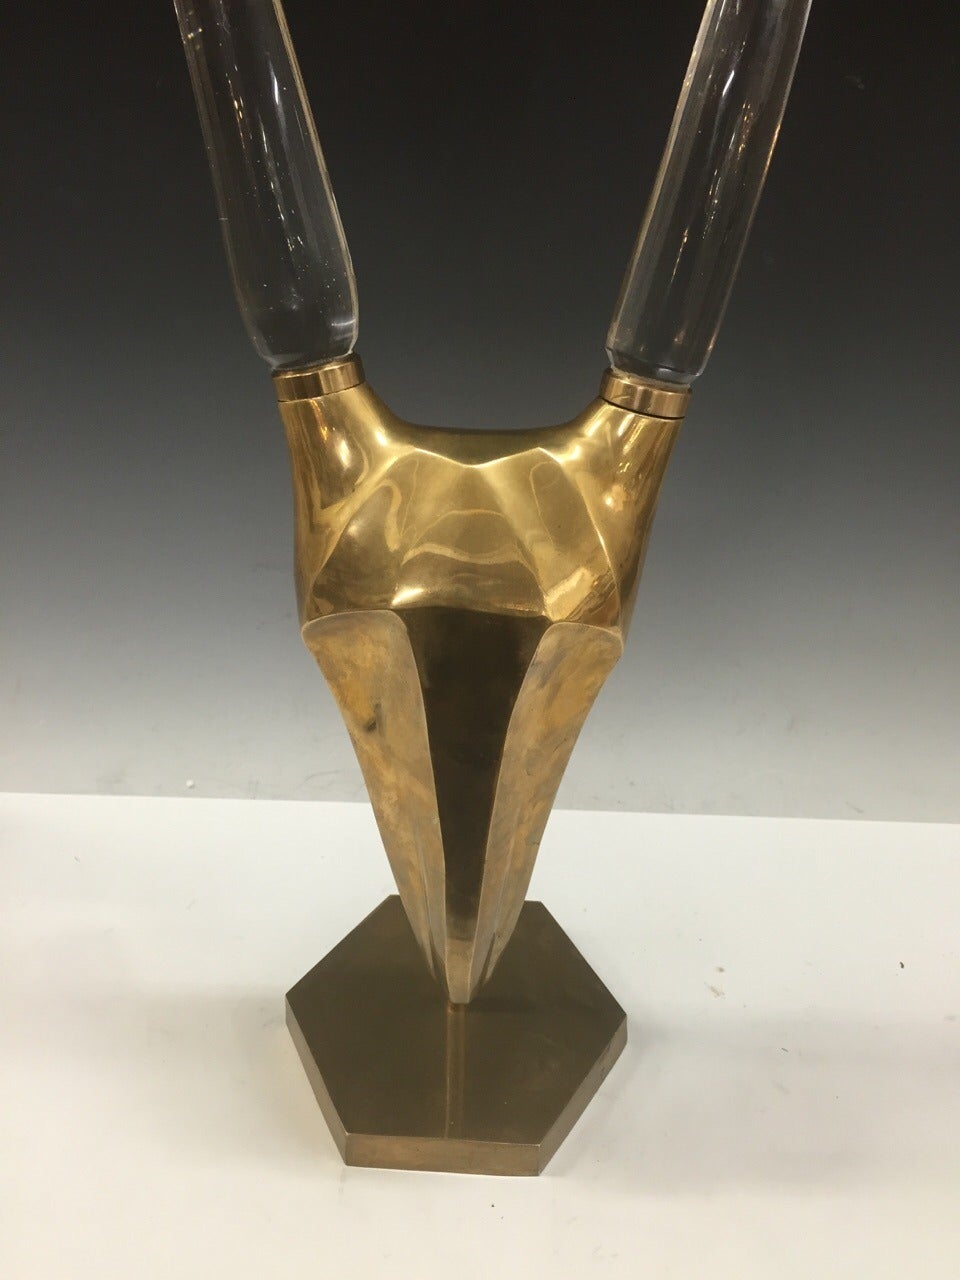 A Great Solid Brass and elegant Glass Horn Gazelle Head Sculpture a perfect modernist addition to any clean eclectic modern setting.